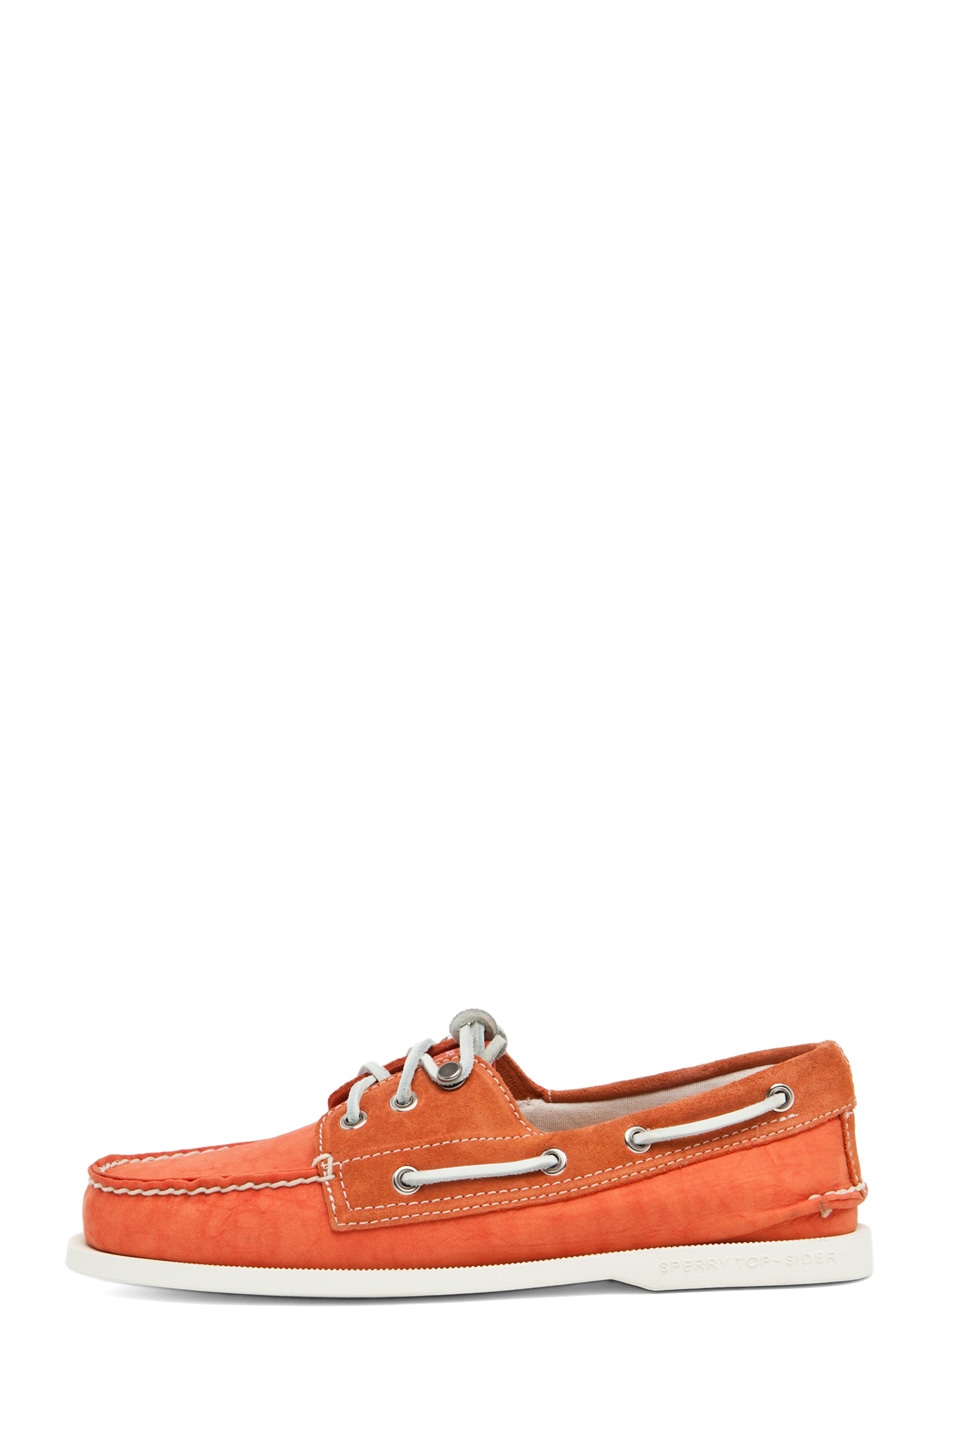 Image 1 of Band of Outsiders x Sperry Top-Sider 3 Eye Boat Shoe in Orange Nylon & Suede